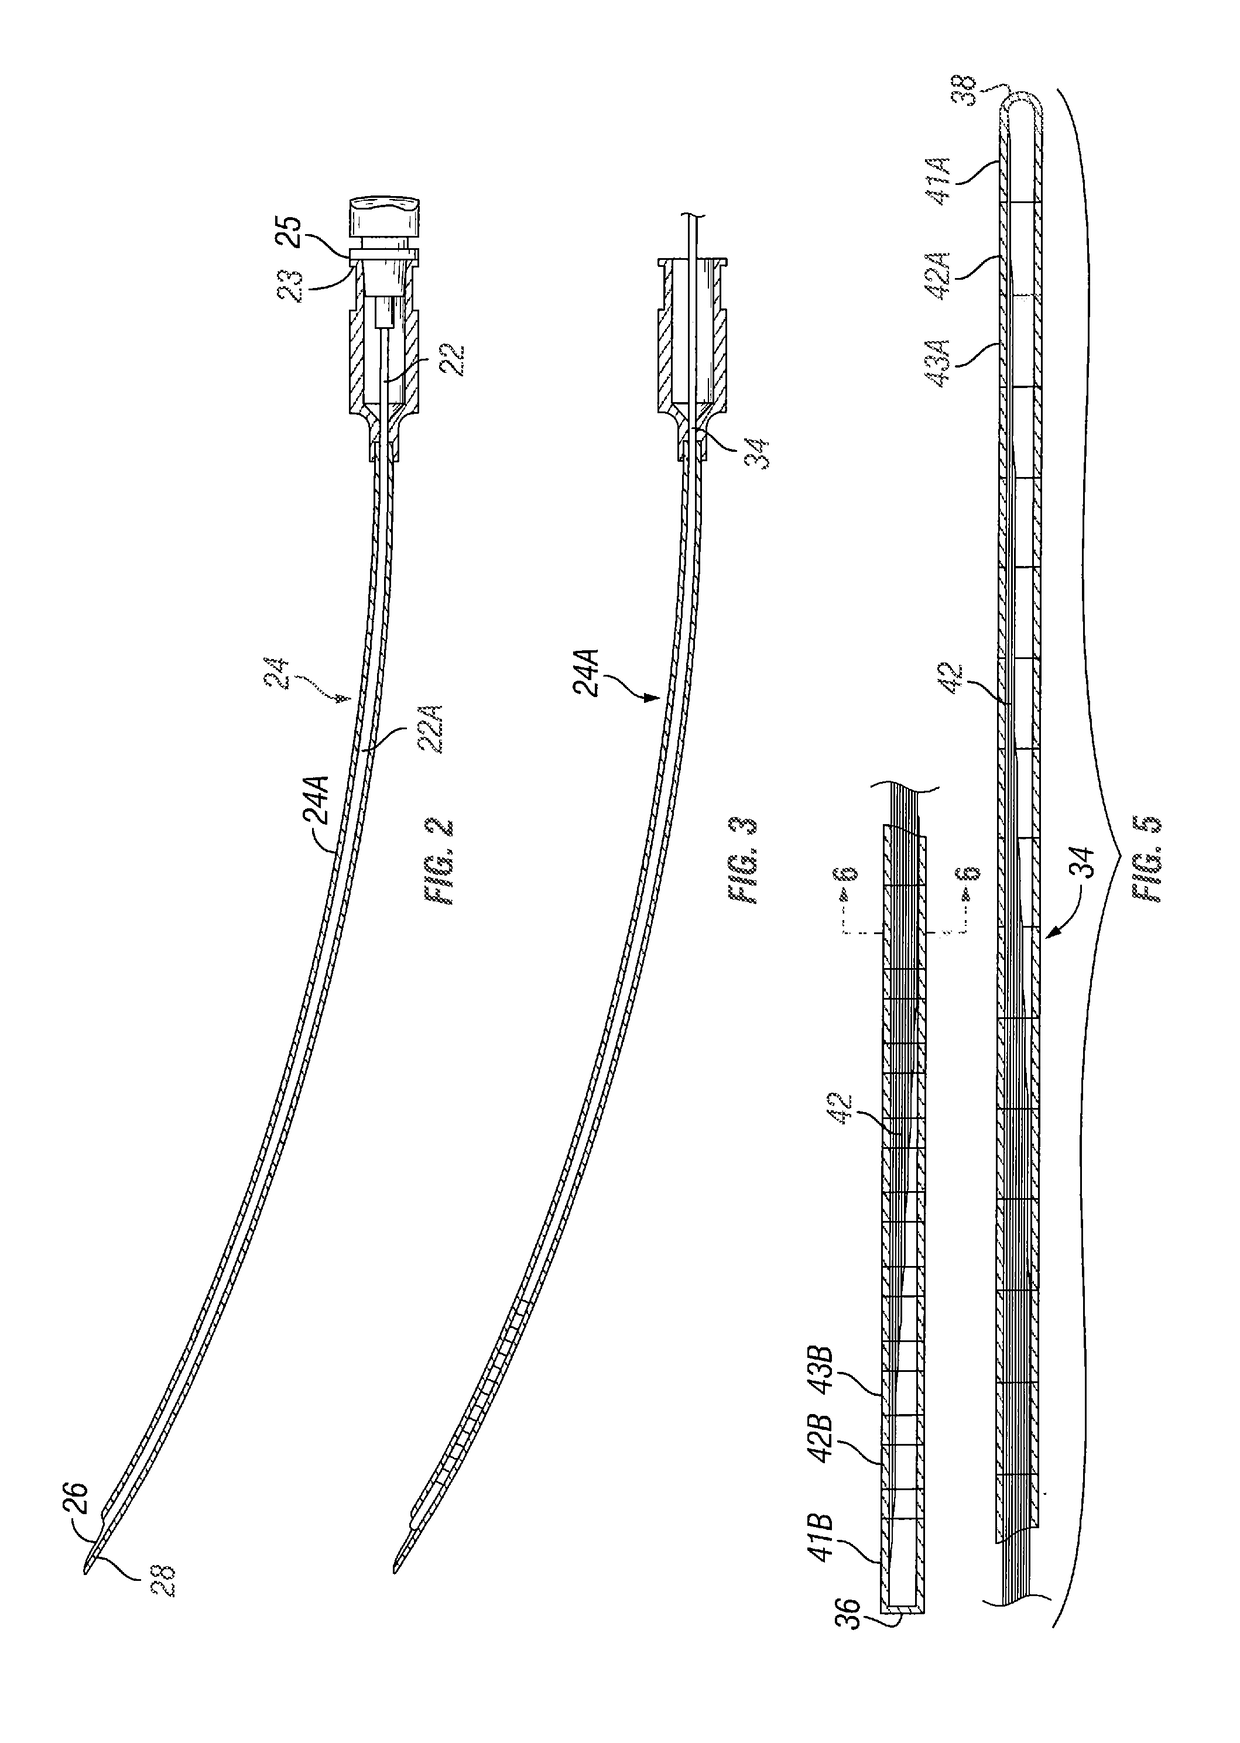 Peripheral nerve field stimulator curved subcutaneous introducer needle with wing attachment specification